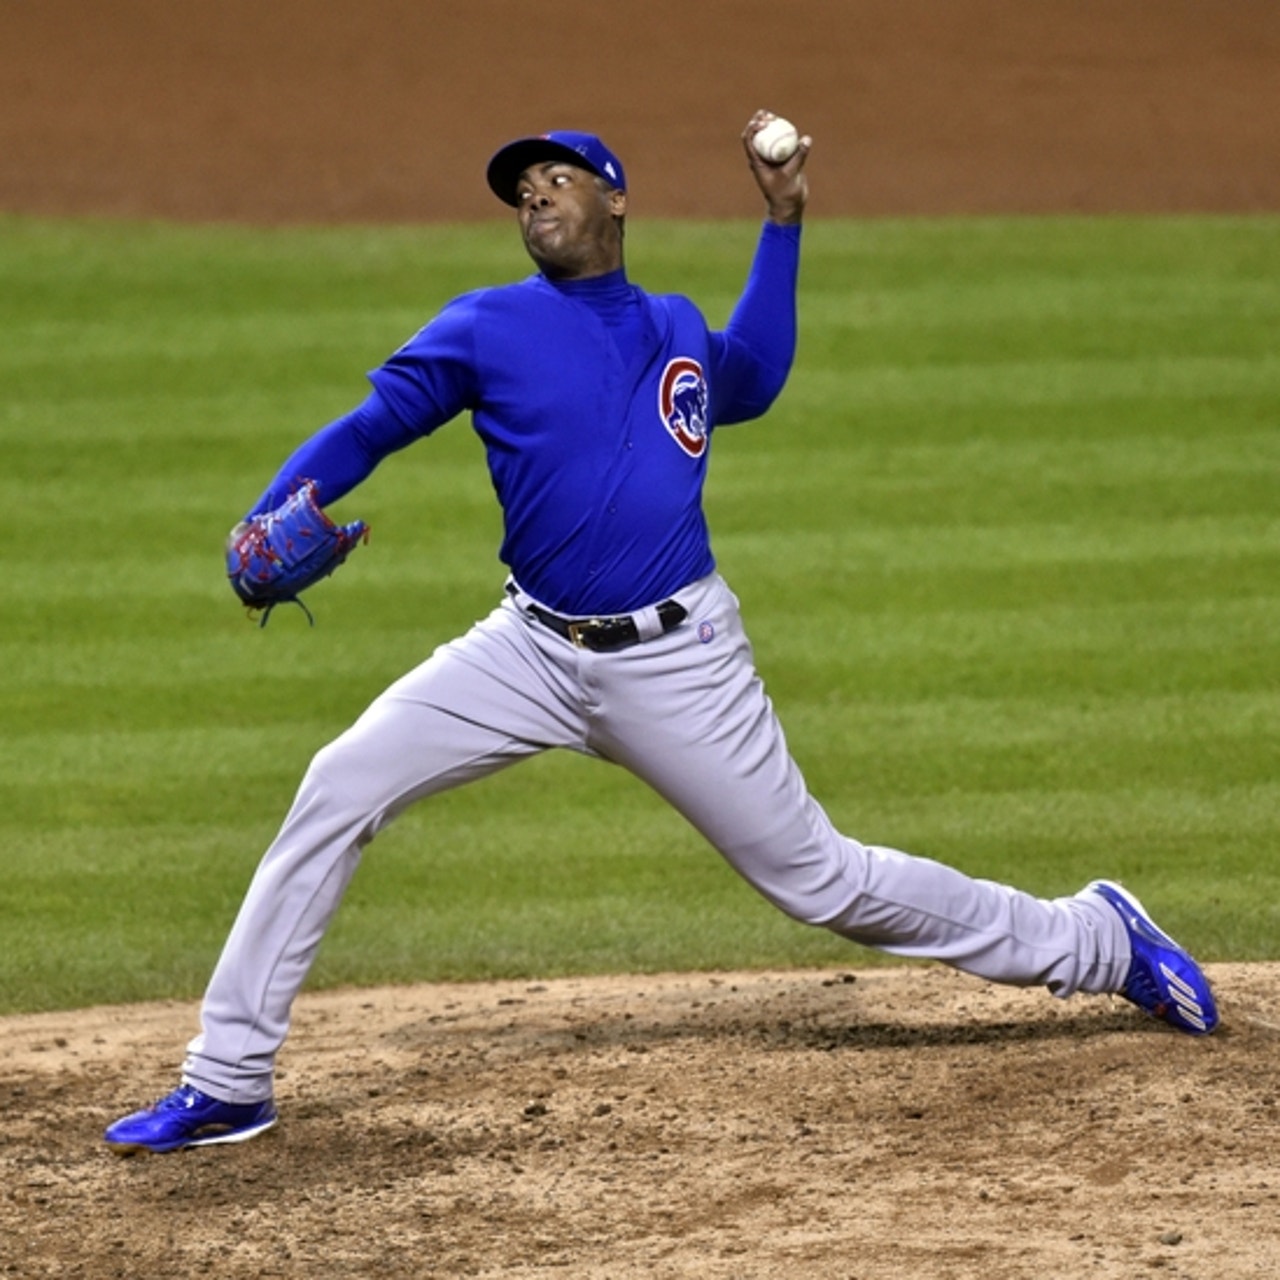 Chicago Cubs: Reliever Chapman may be on the move to Yankees